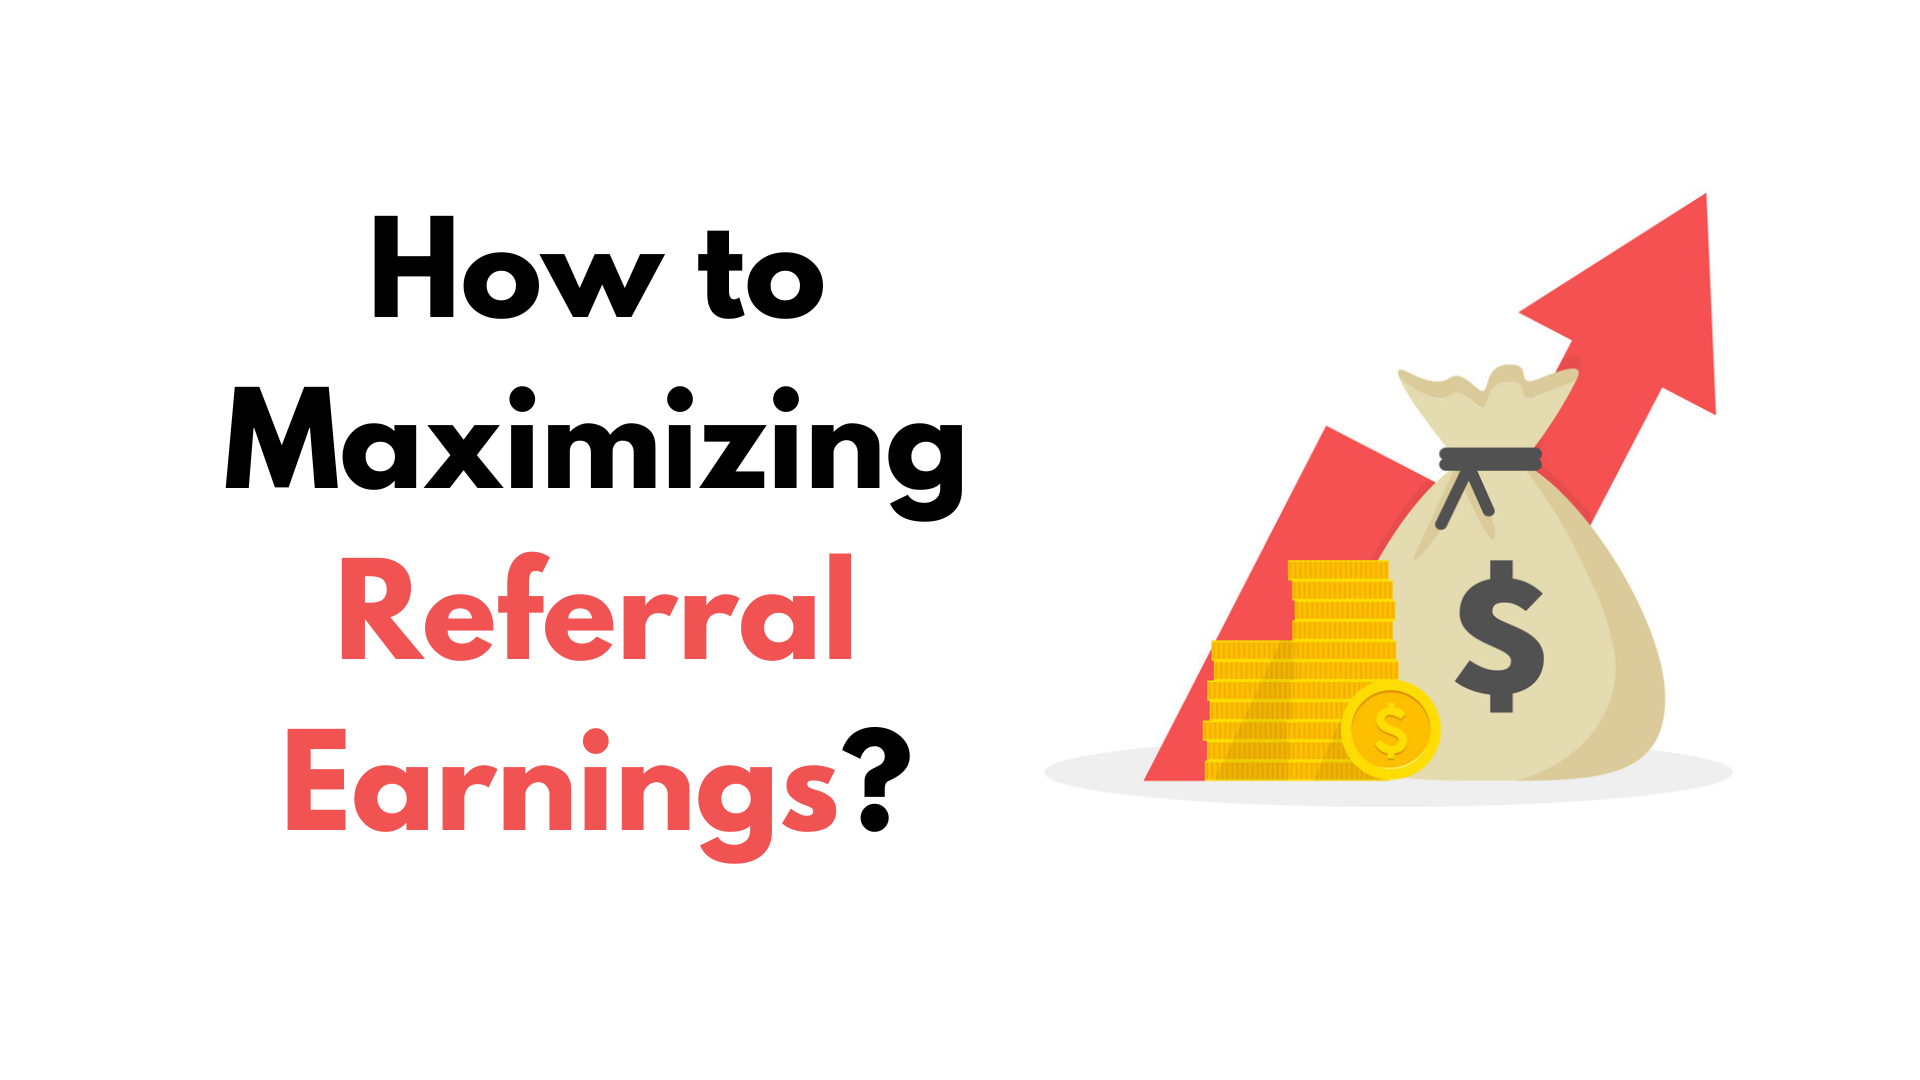 Maximize Referrals Earning